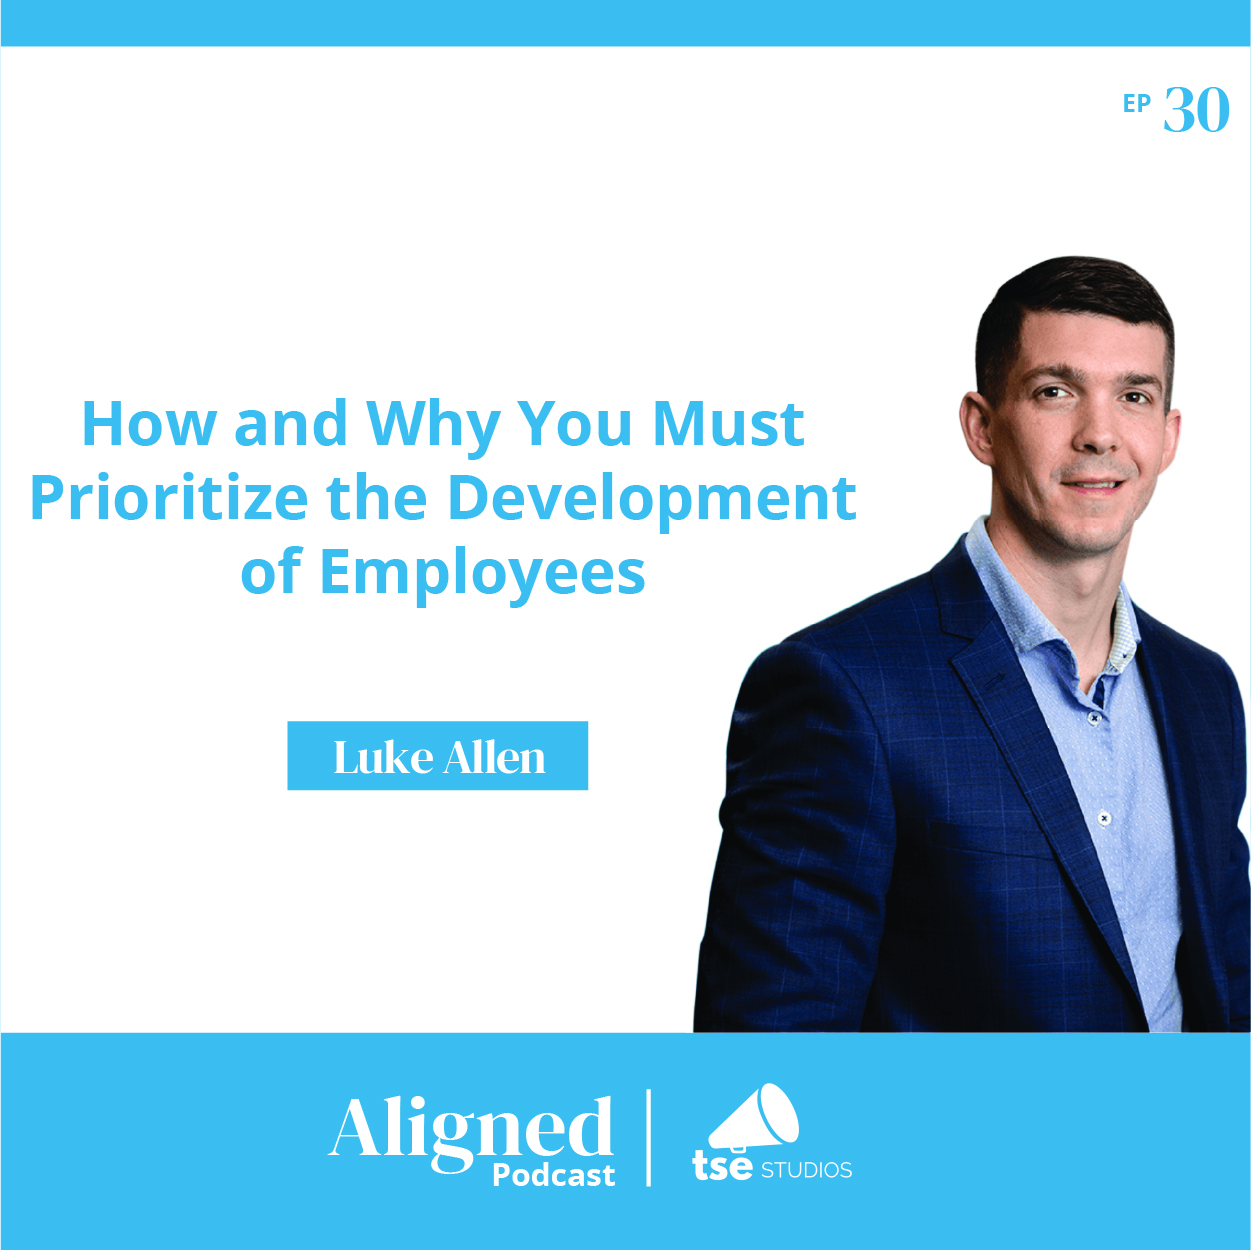 How and Why You Must Prioritize The Development of Employees